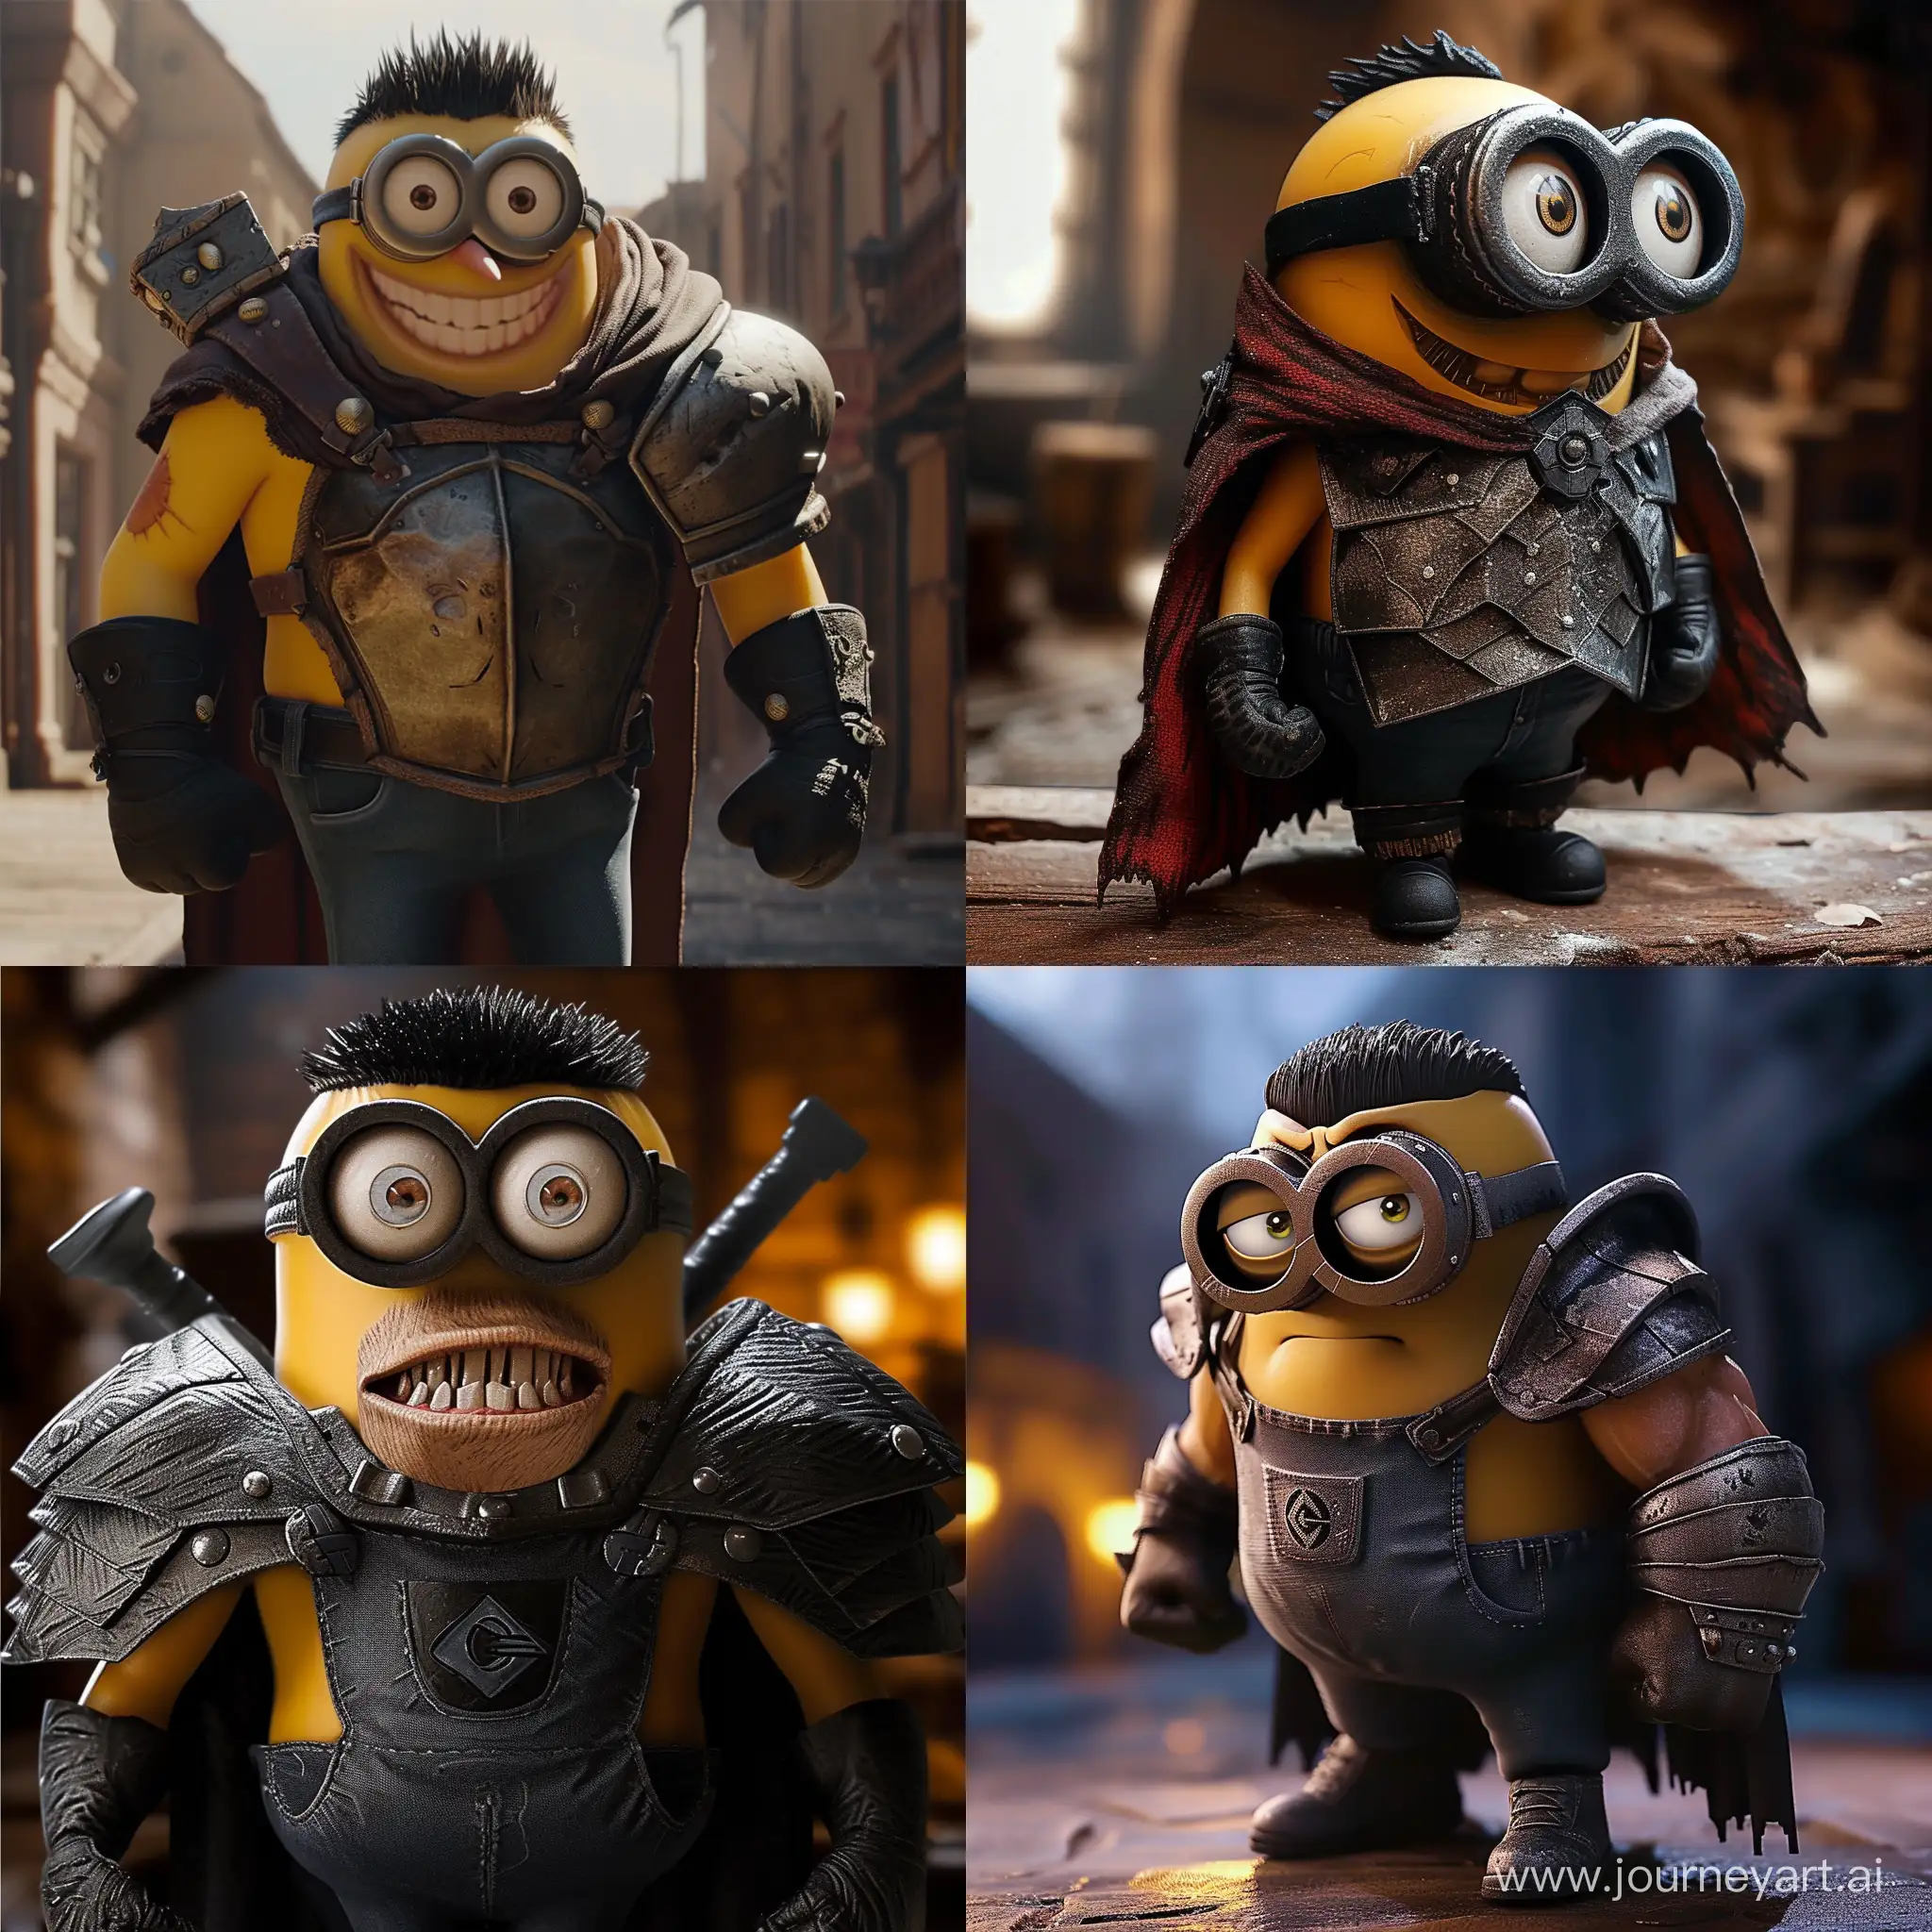 Minion-Cosplaying-as-Guts-from-Berserk